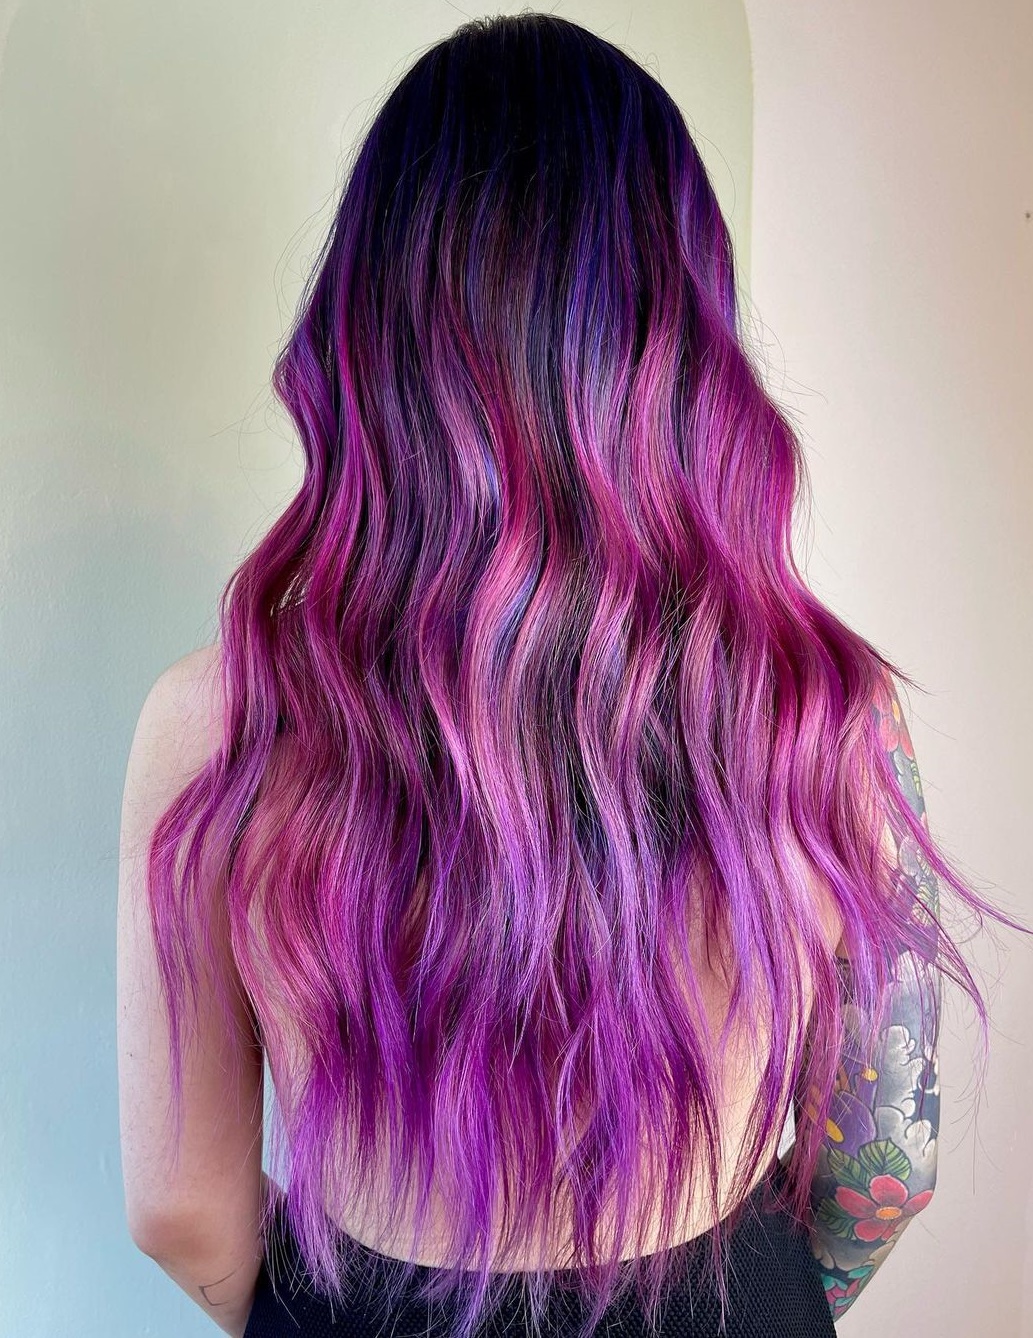 Long Purple Hair with Dark Roots